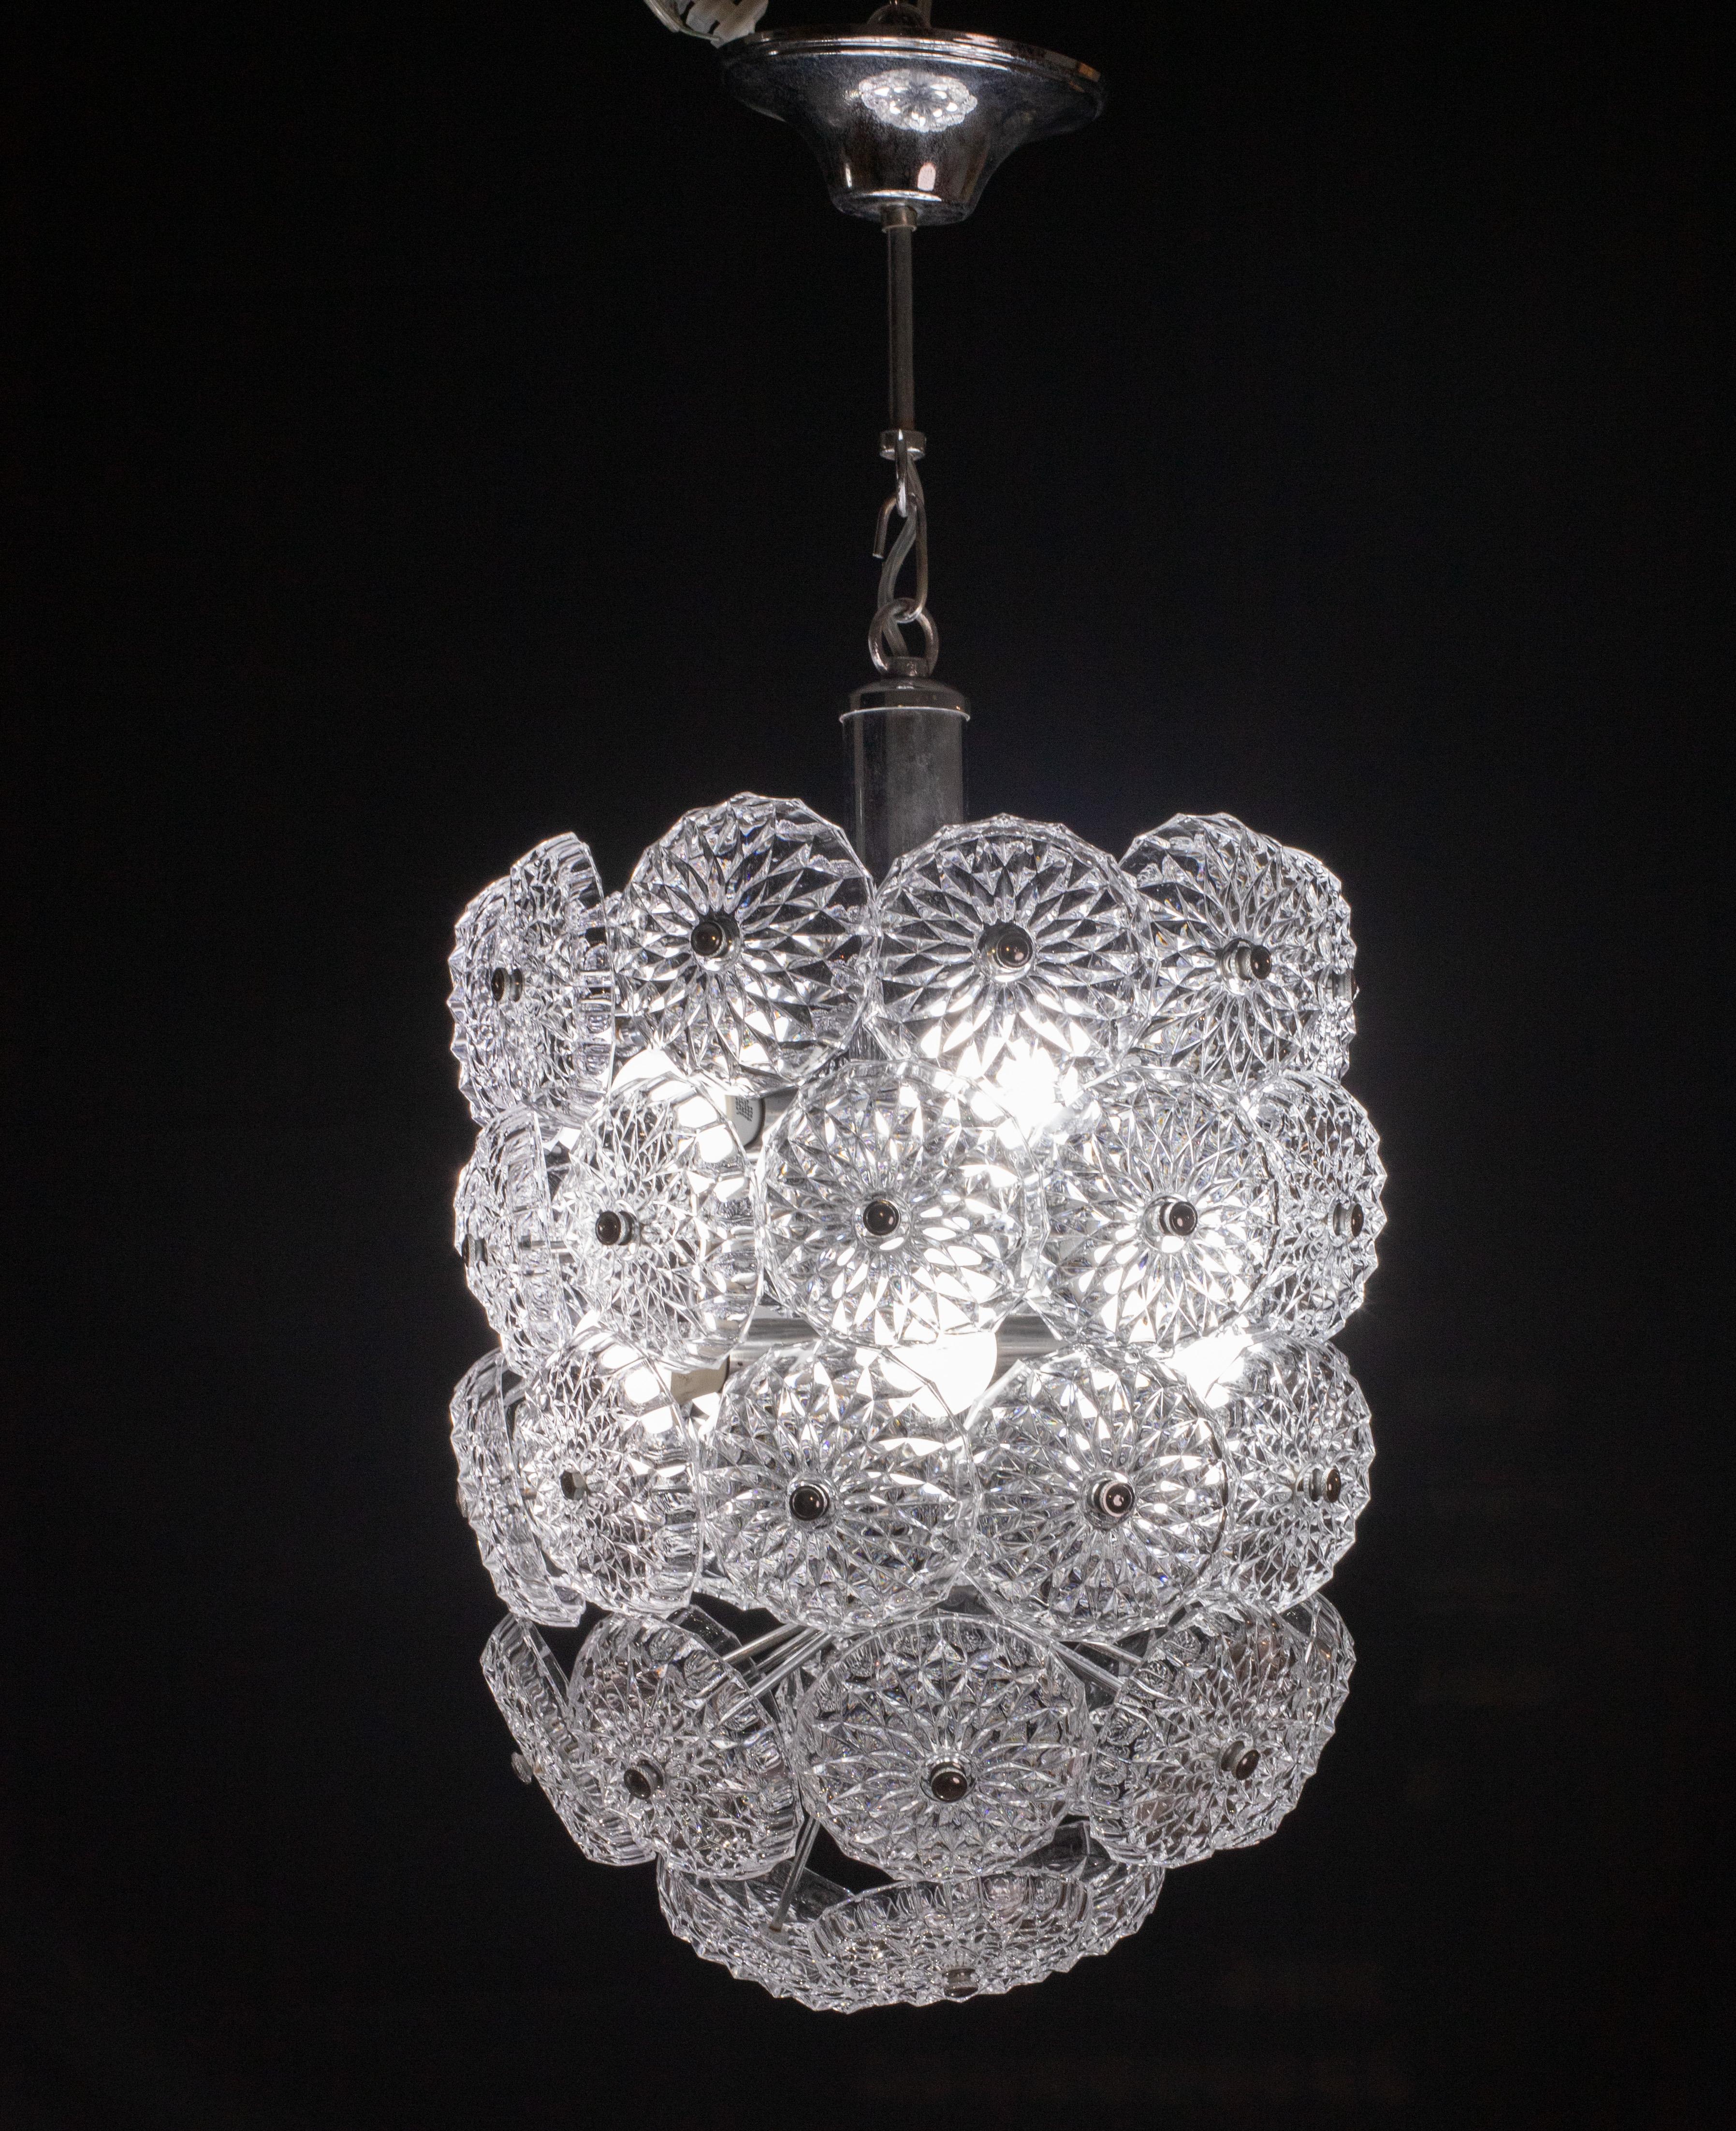 Spunik style crystal chandelier.

Period: circa 1970

The chandelier has 10 light points, very good vintage condition, a small bolt that mounts on the flower has been replaced